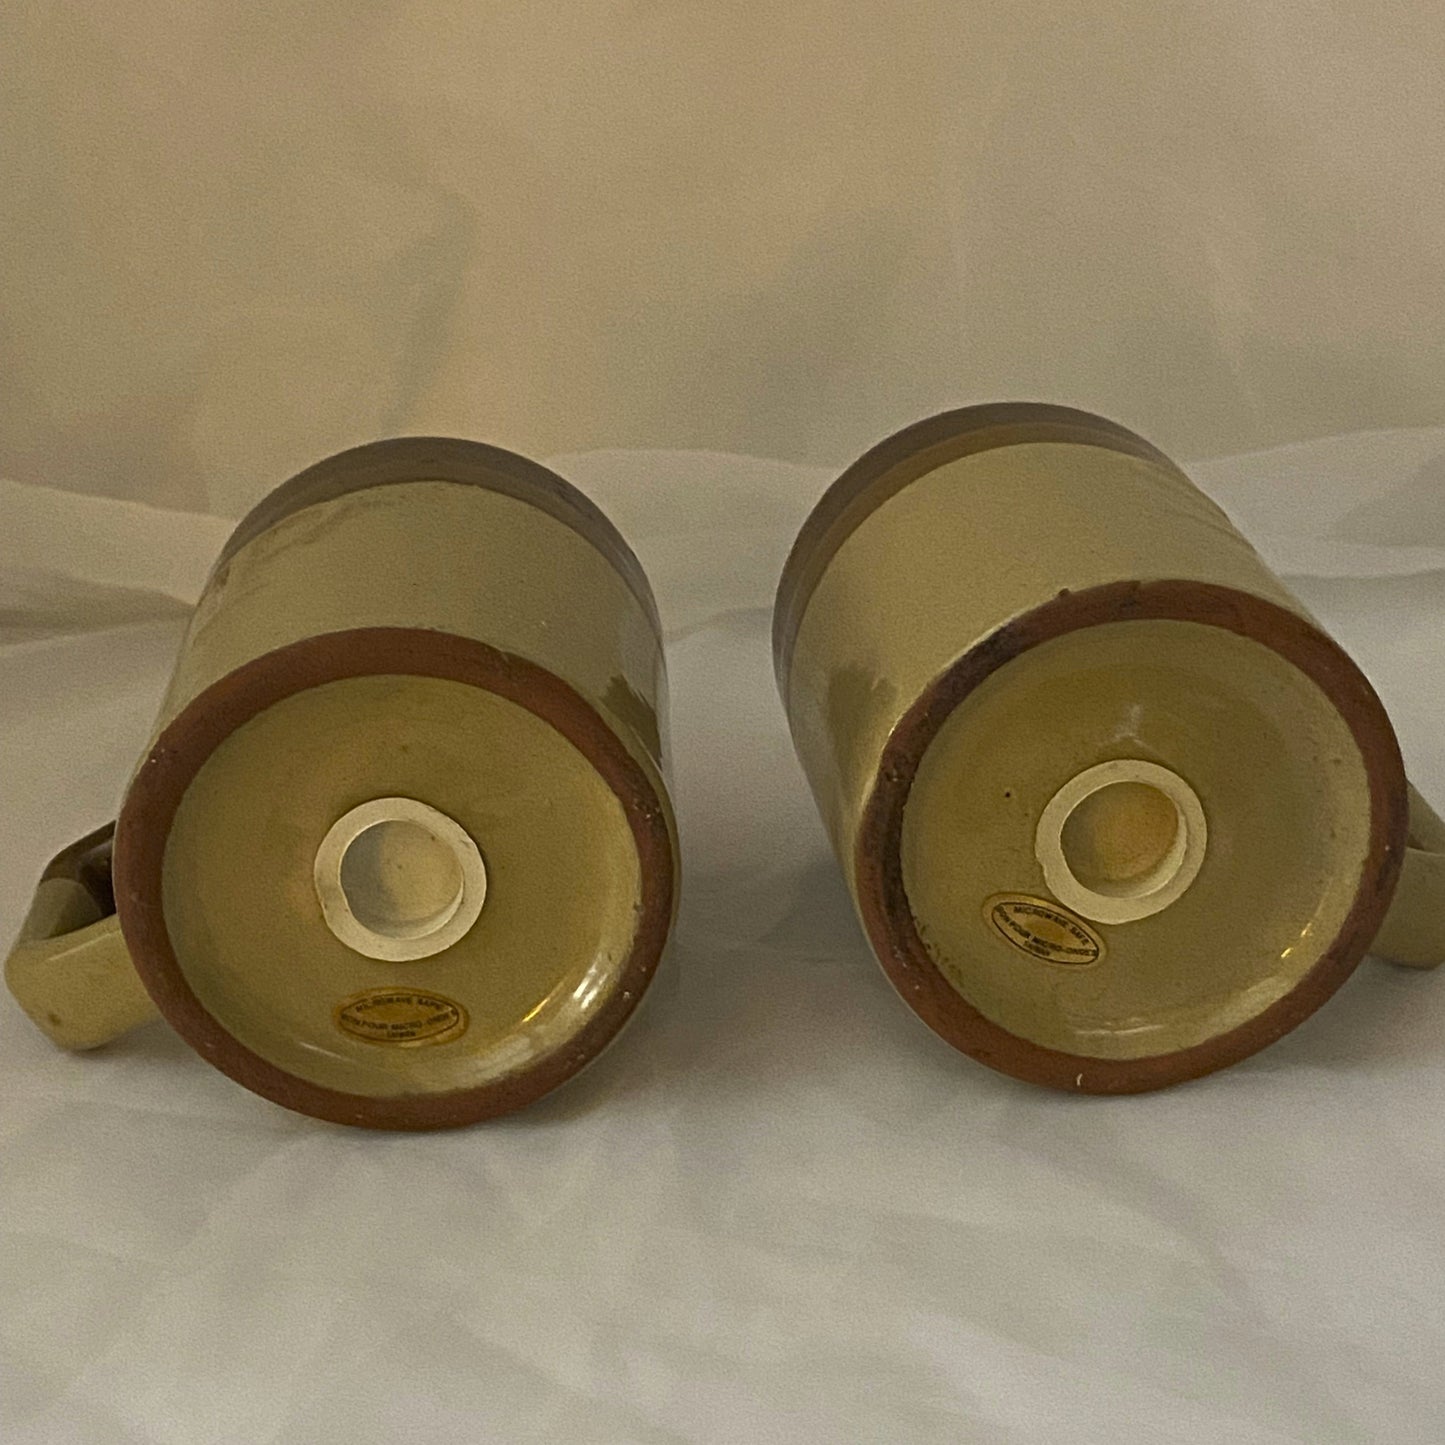 Brown and Tan Salt and Pepper Shaker